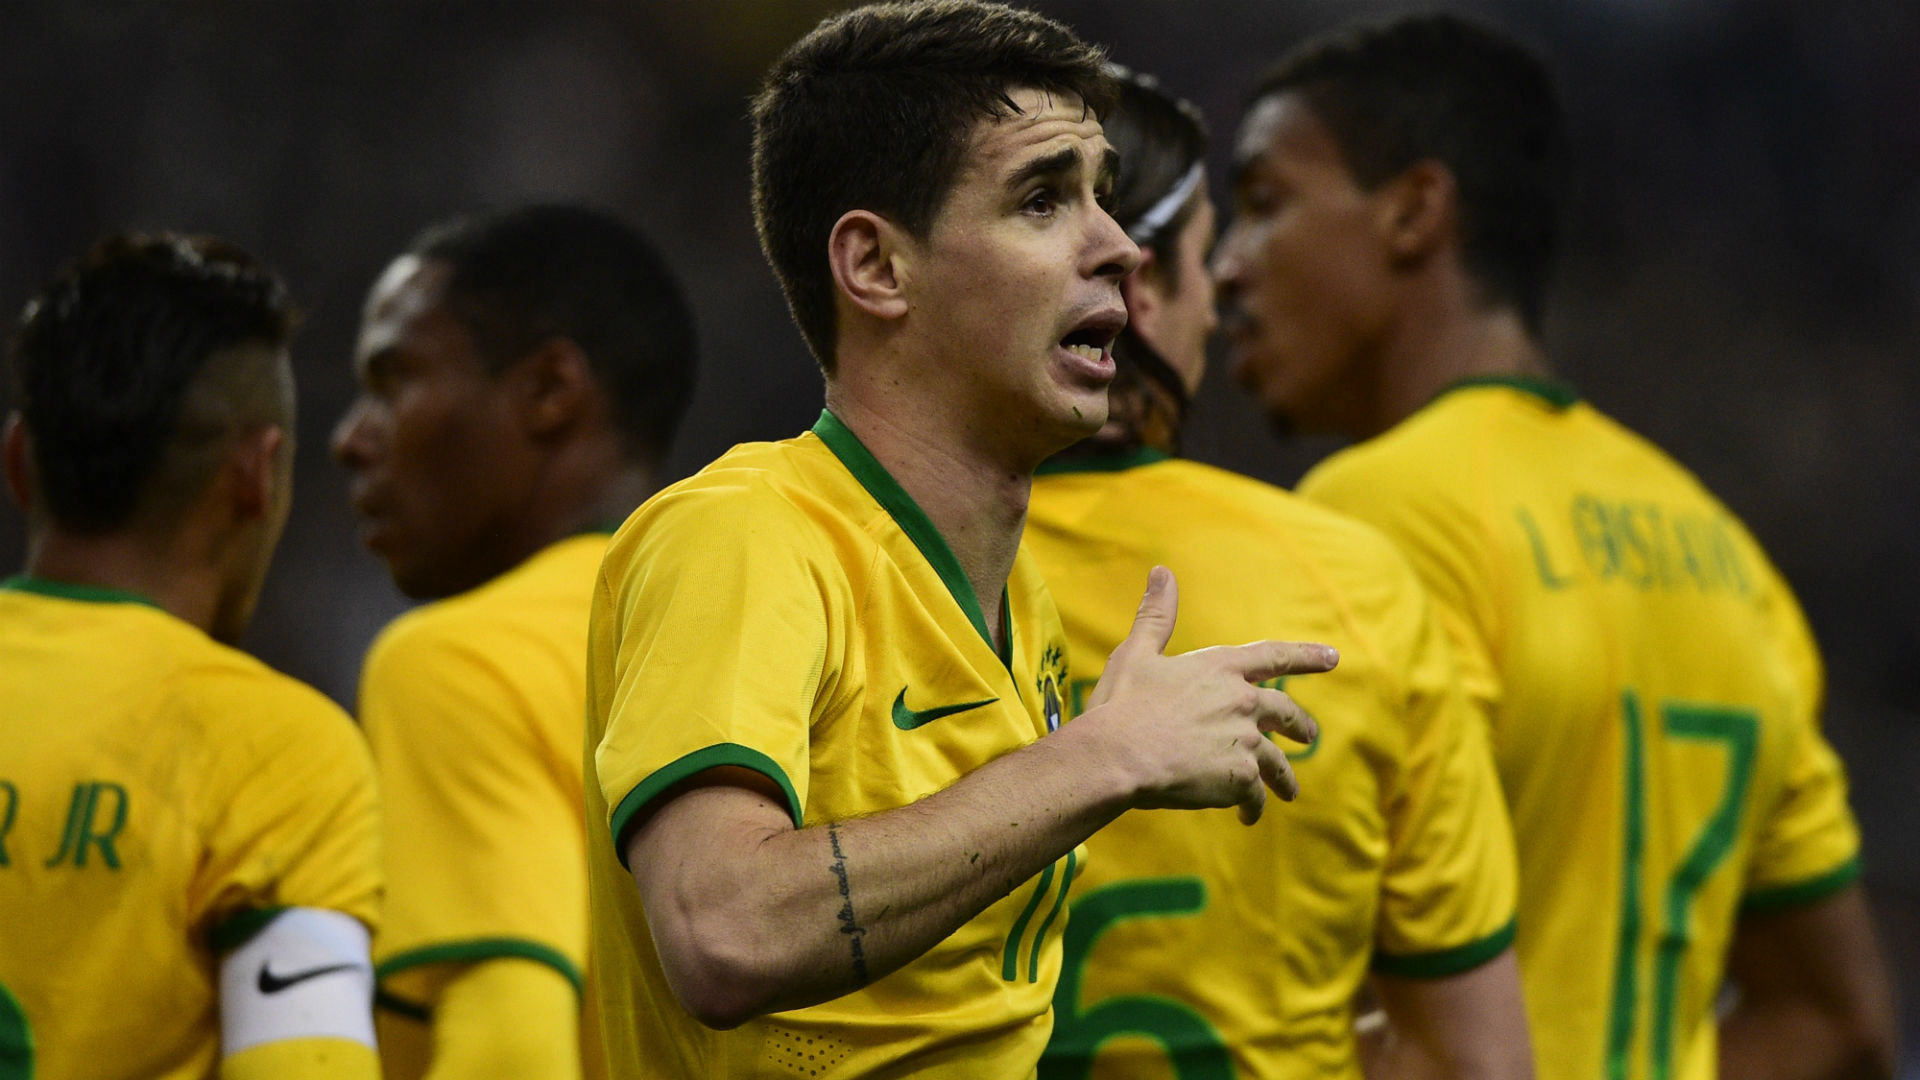 Ex-Chelsea star Oscar wants to switch international allegiance from Brazil to China